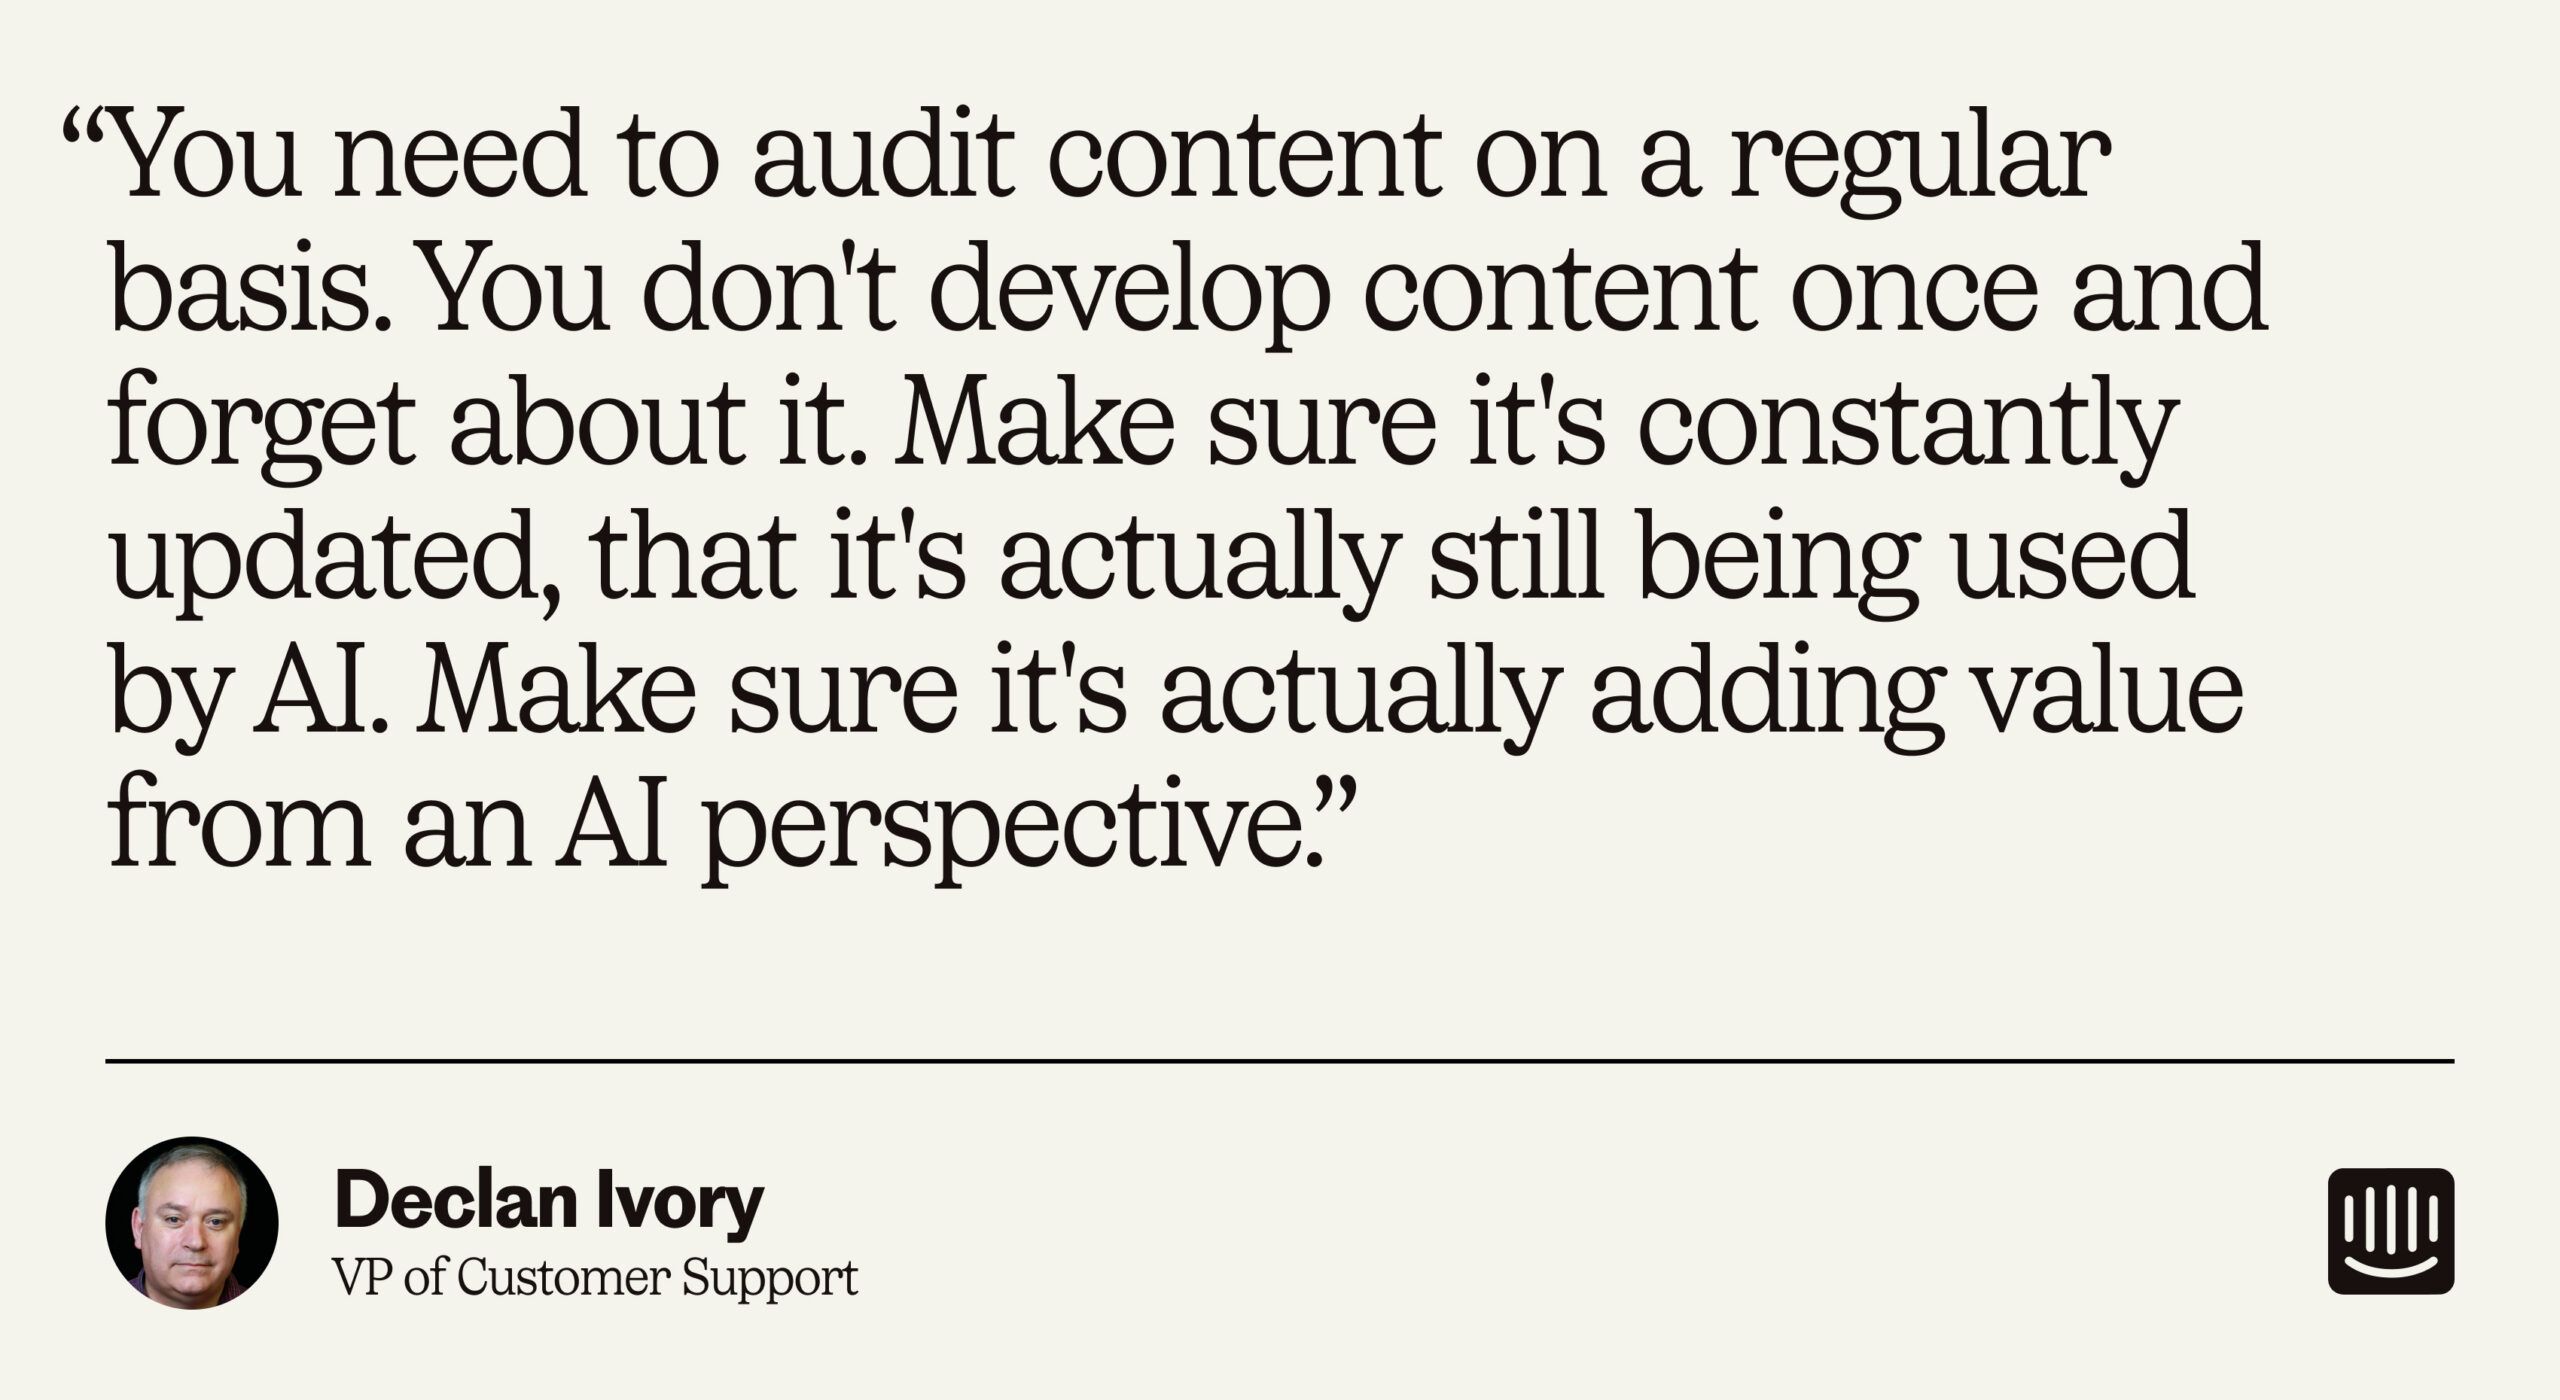 “You need to audit content on a regular basis. You don't develop content once and forget about it. Make sure it's constantly updated, that it's actually still being used by AI. Make sure it's actually adding value from an AI perspective.” – Declan Ivory, VP of Customer Support at Intercom